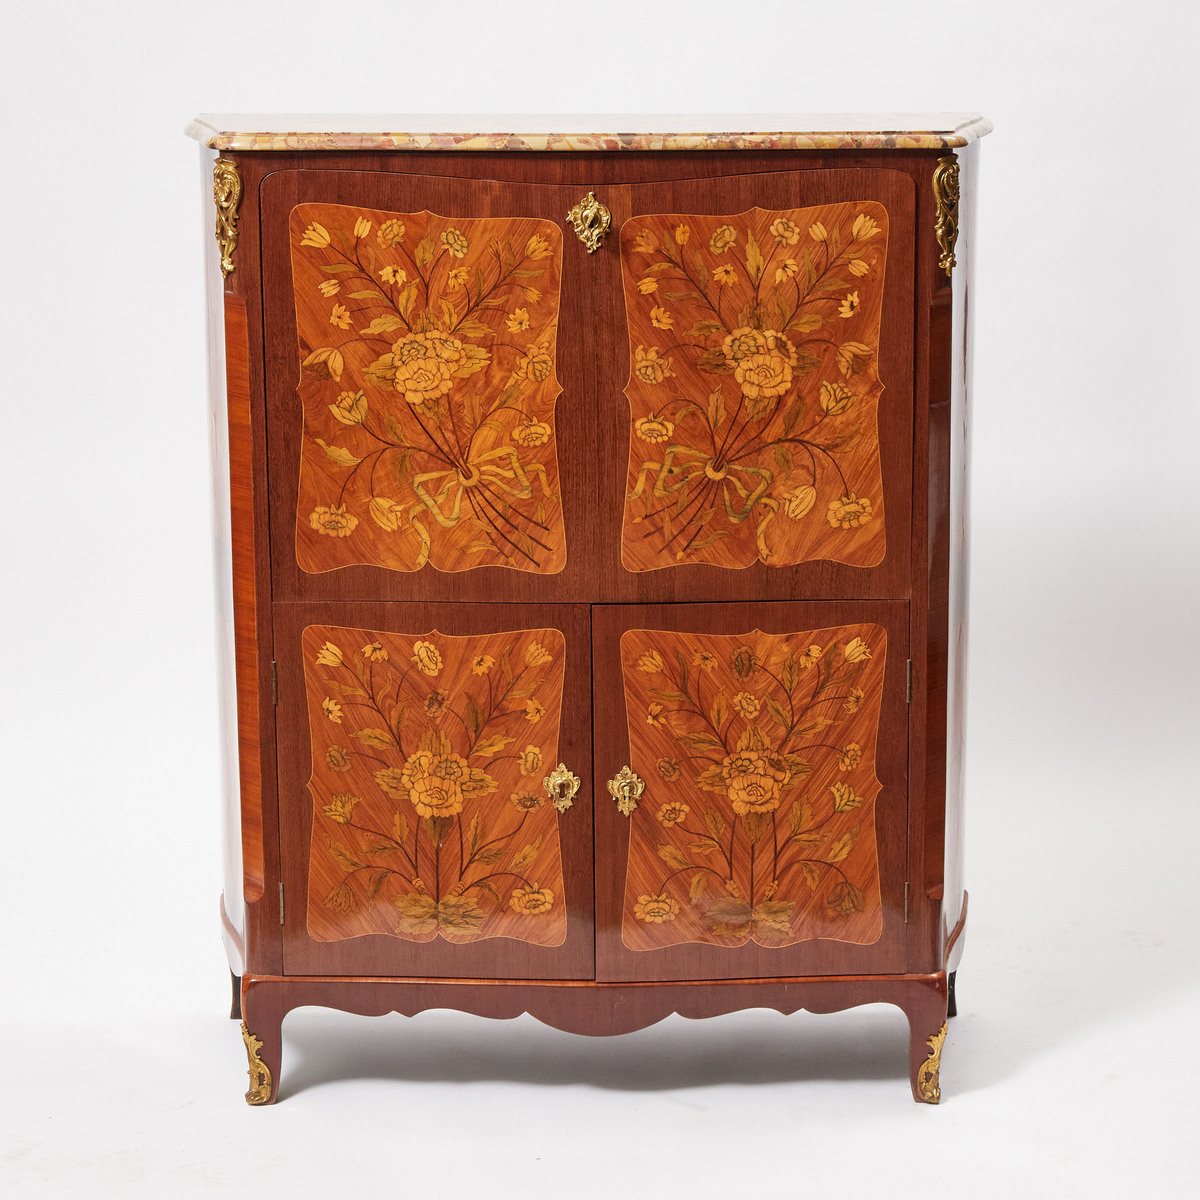 Louis XV 'Secrétaire à Abattant' or Fall Front Desk, 19th/20th century - Image 2 of 4